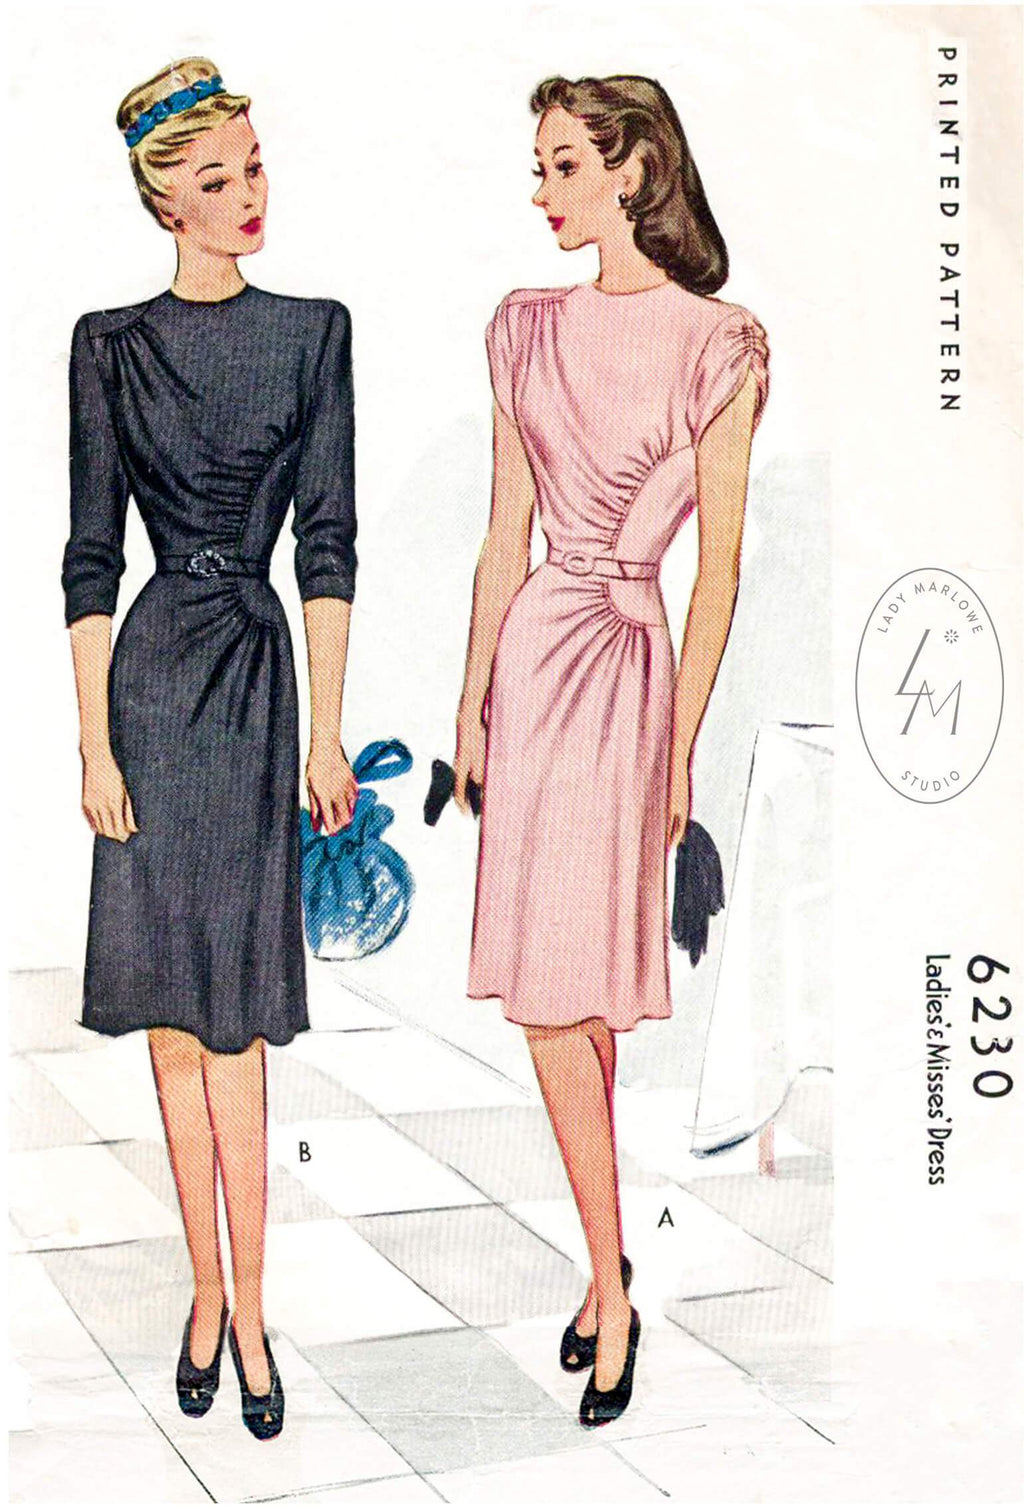 McCall 6230 1940s dress vintage sewing pattern reproduction